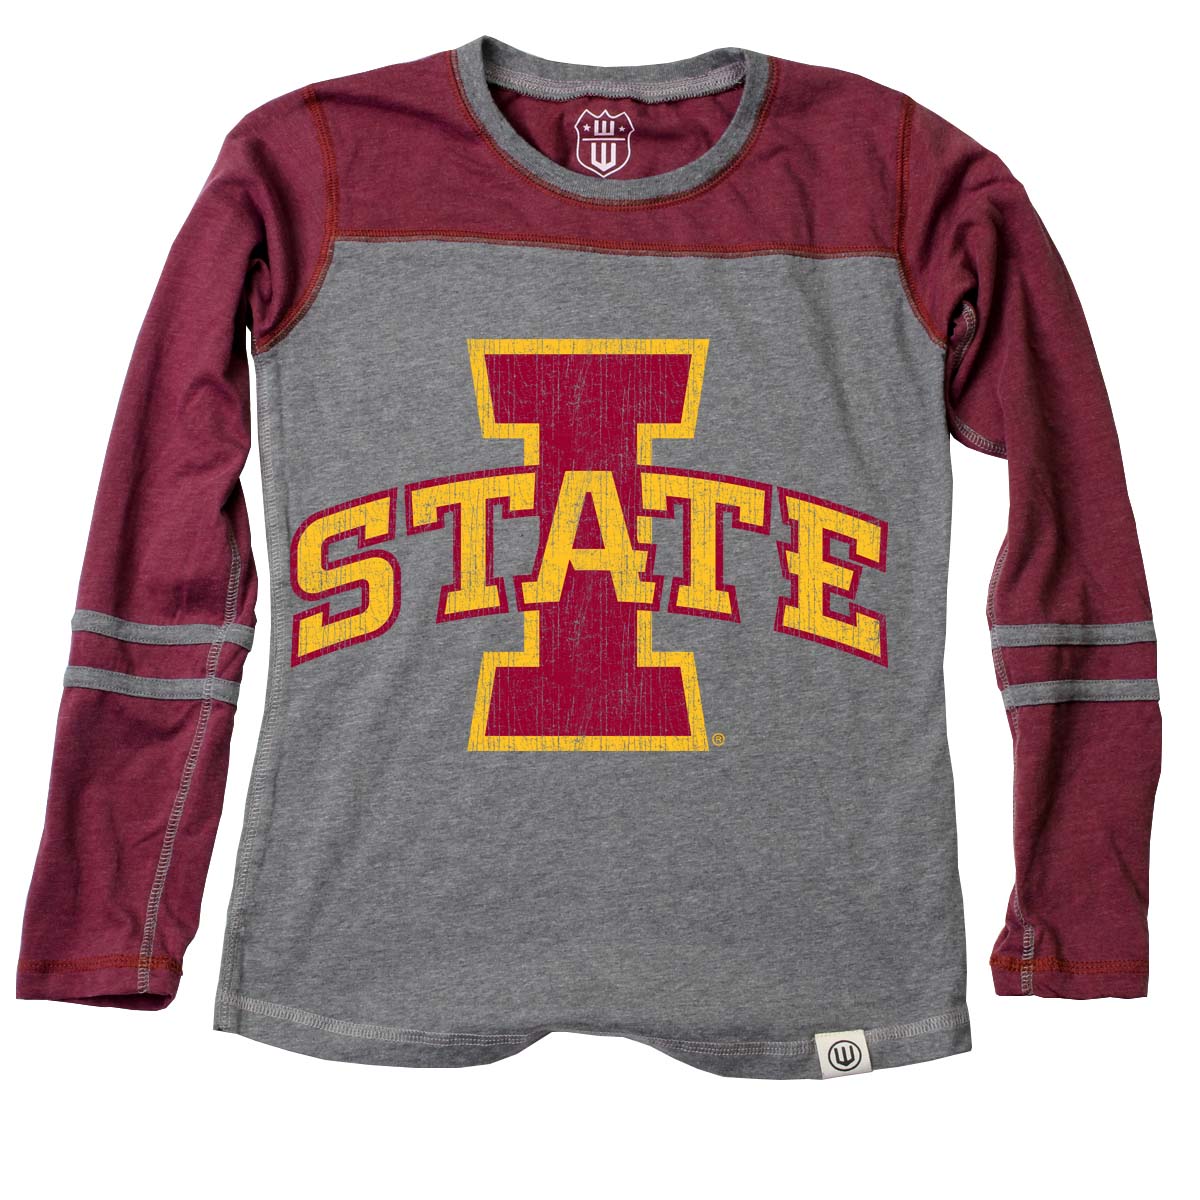 Iowa State Cyclones Youth Girls Jersey Top